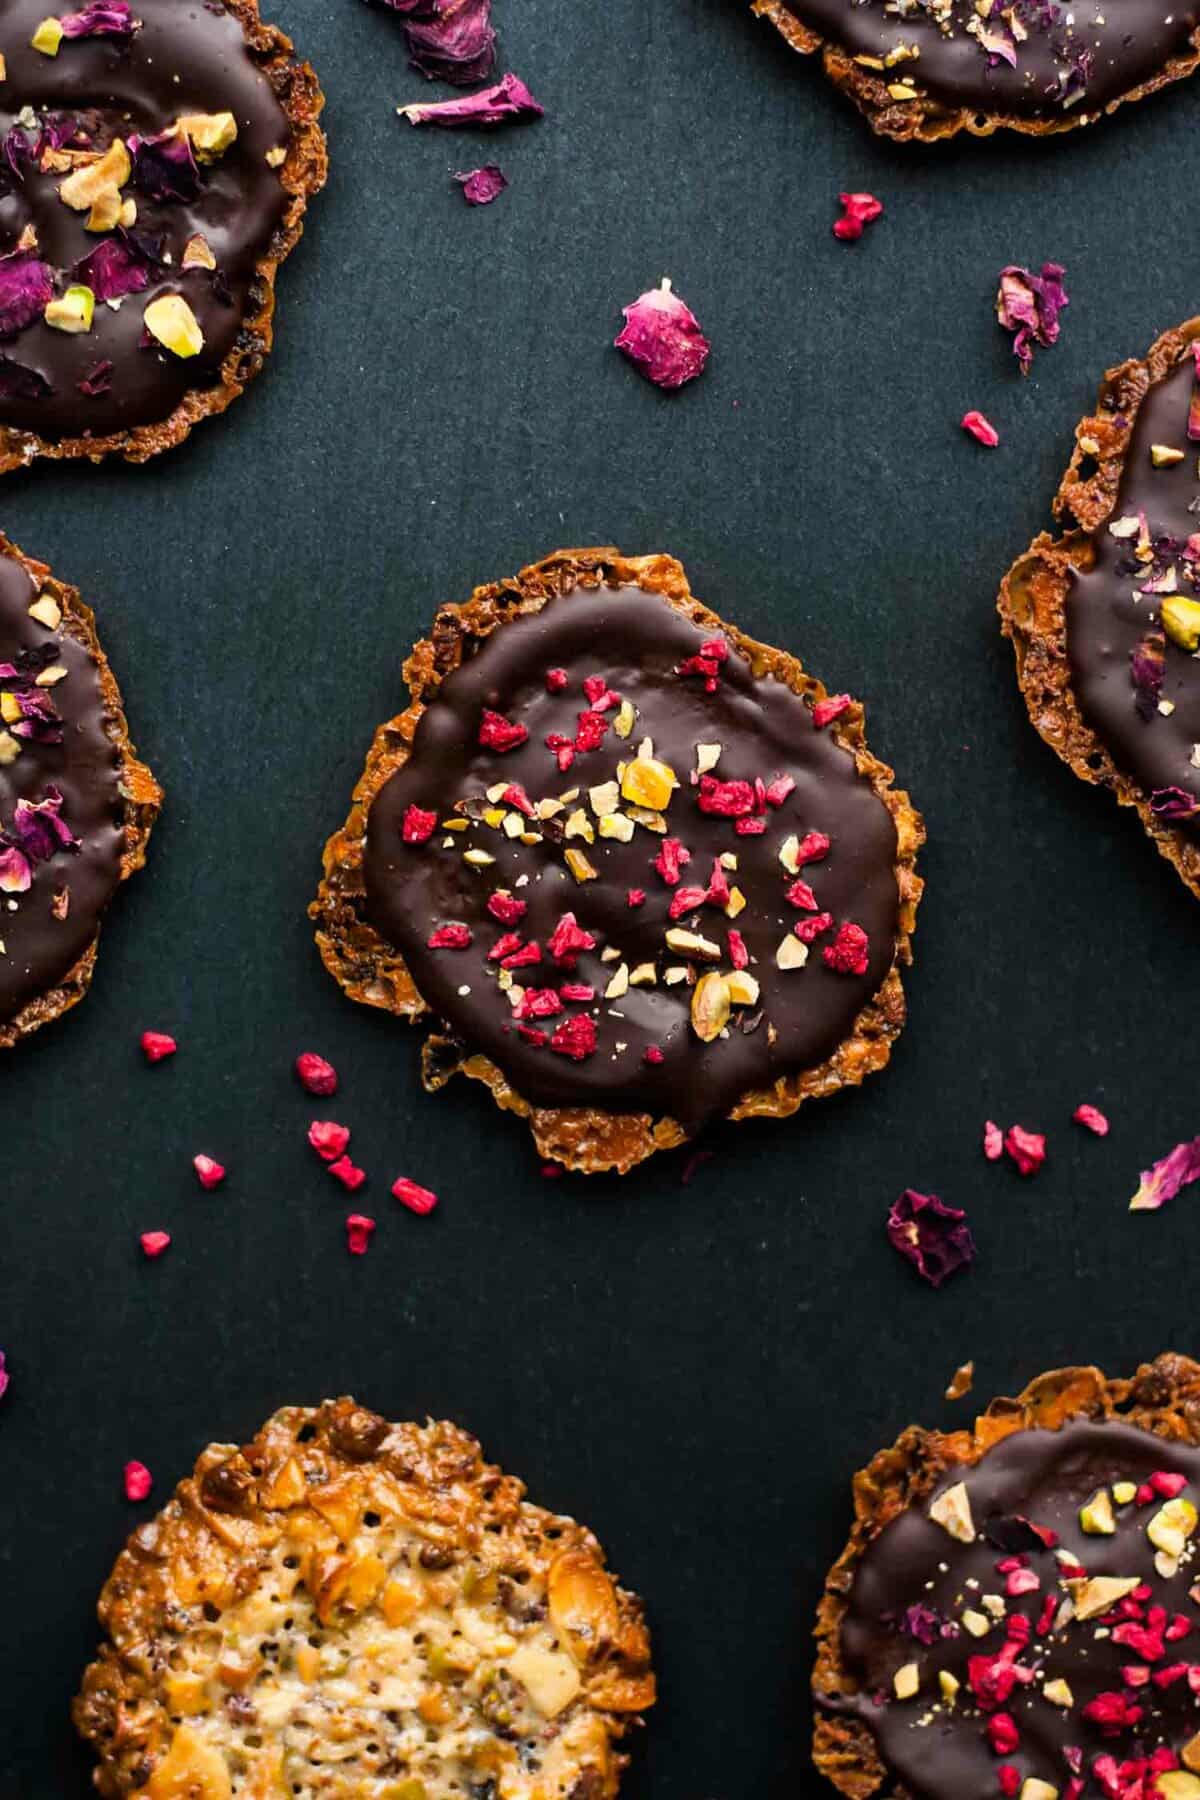 An array of chocolate almond florentines with rose petals around.